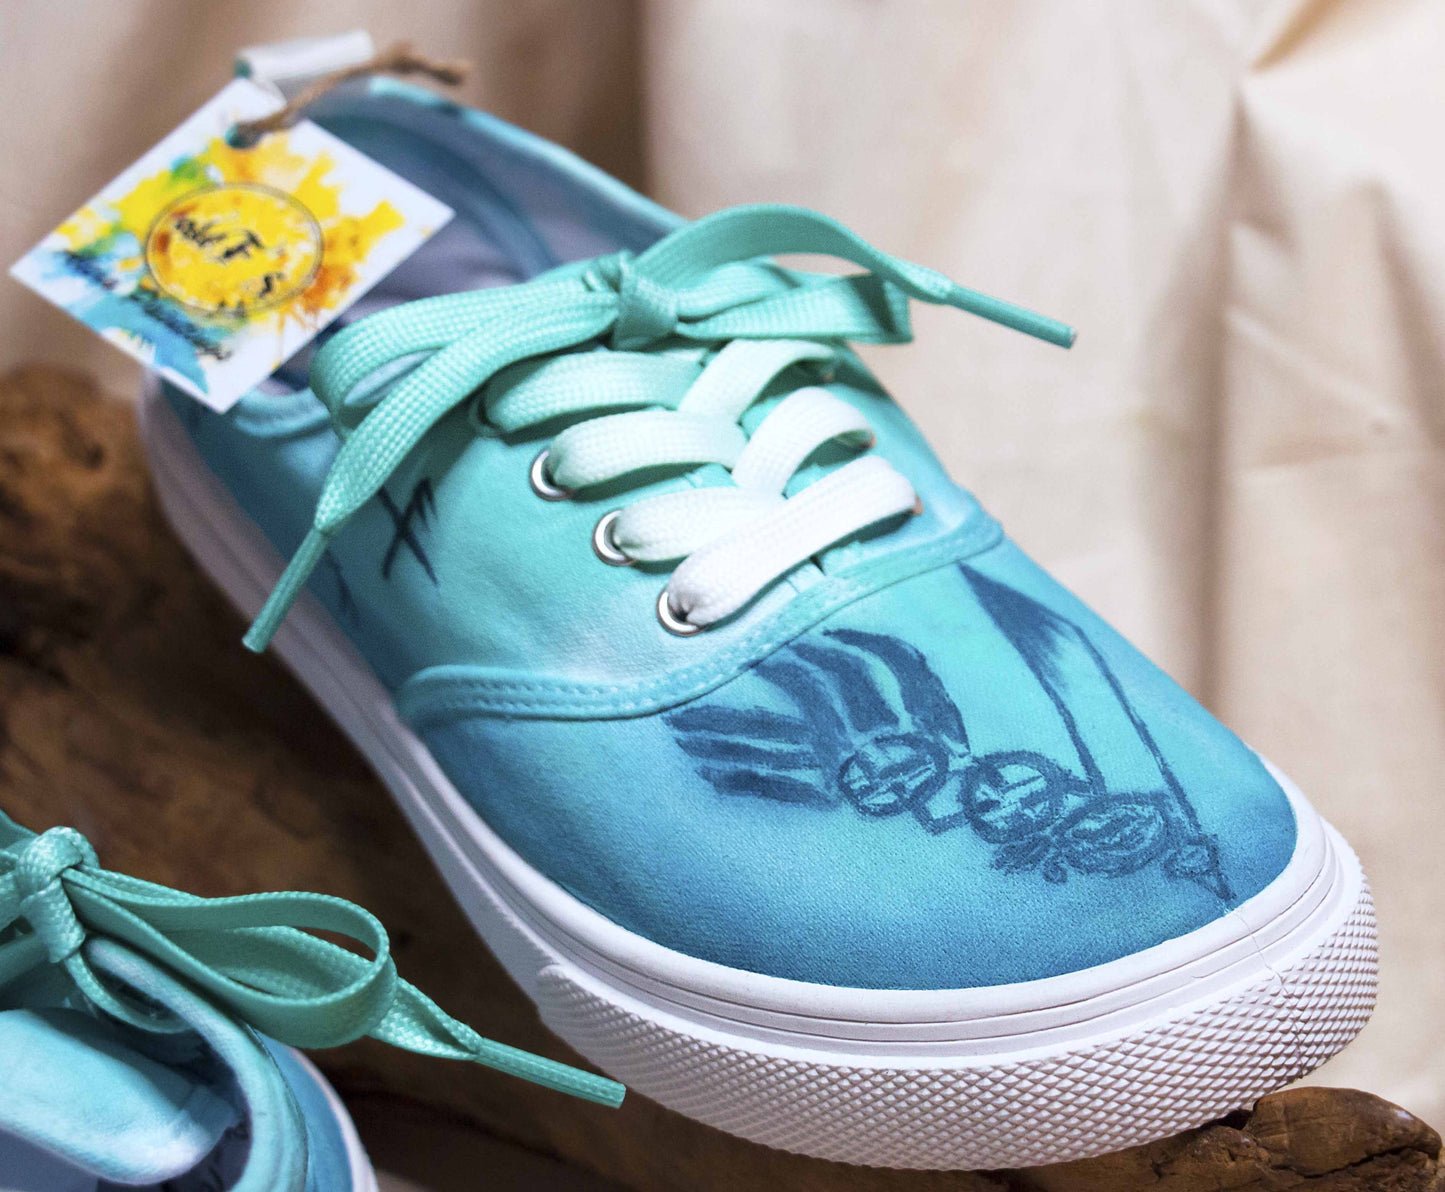 Tenisi Pictati, Painted Sneakers, Pictura Manuala Tenisi, handmade shoes, Everyday shoes, Woman Fashion, customized shoes, Trees, Aurora Trees, Aurora, Aurora Sneakers, Vikings, Vikings movie, Vkings totem